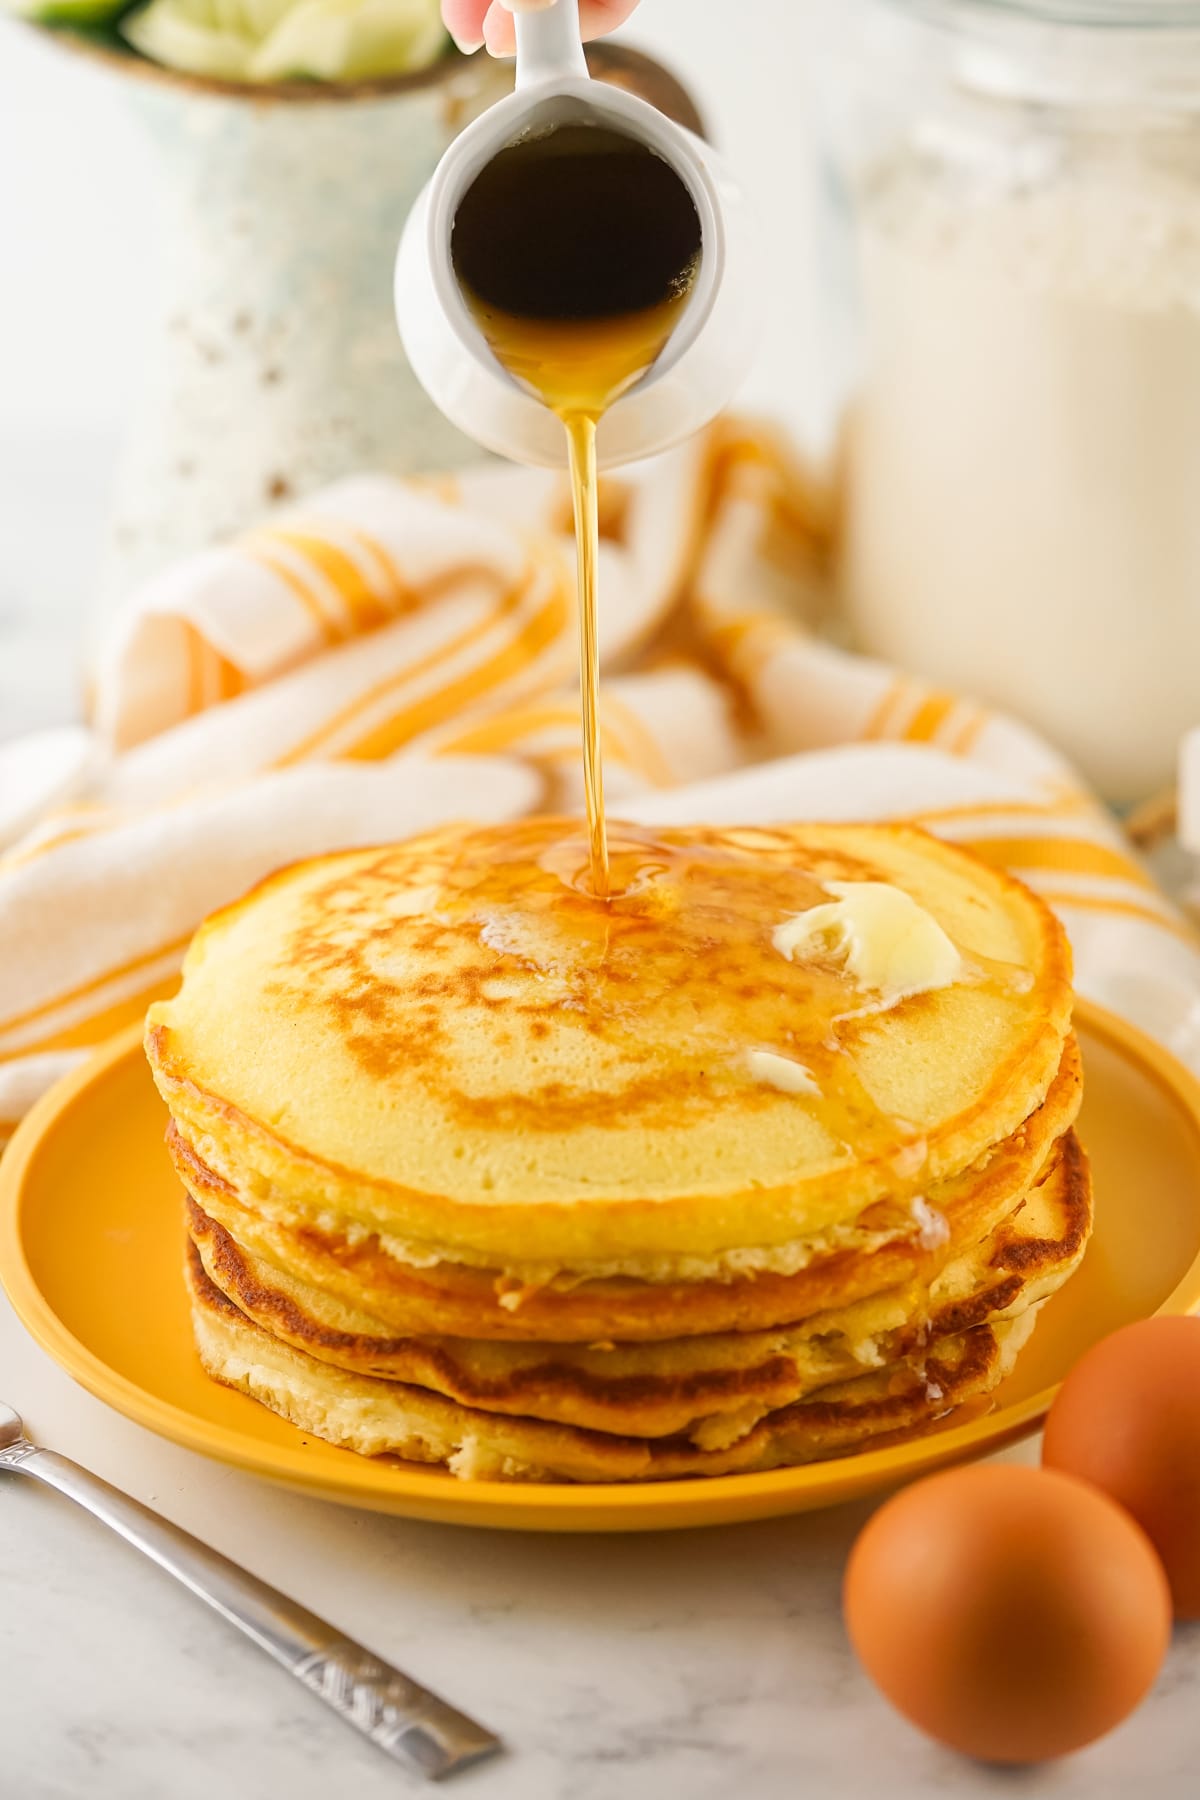 A stack of Freshly cooked Homemade Pancakes being poured with syrup.